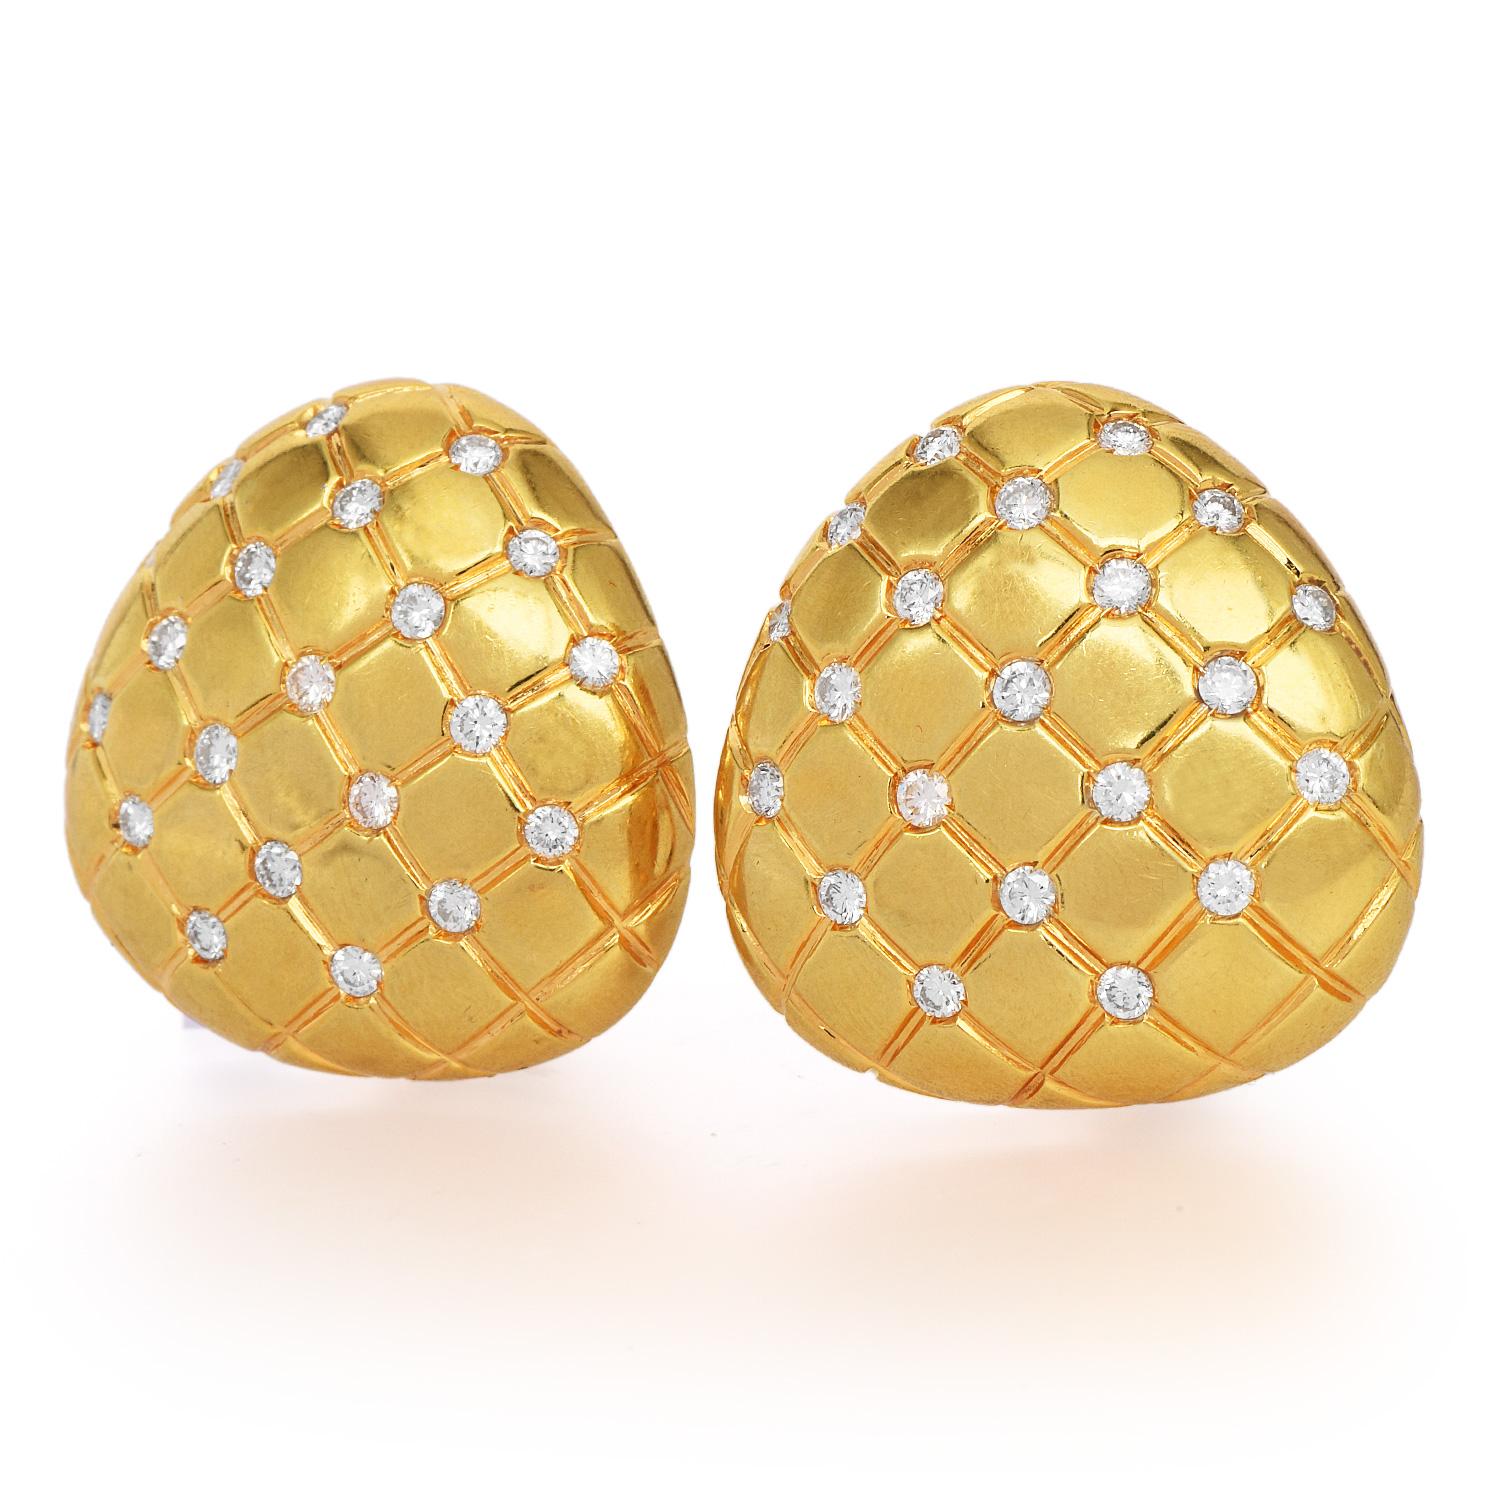  1990s Chic quilted cushion trillion design clip-on earrings, with a luxurious high polished finish.
Crafted in solid 18K Yellow Gold, Complimenting the look are (42) round-cut, flush set, genuine diamonds weighing approximately 1.25 carats (F-G